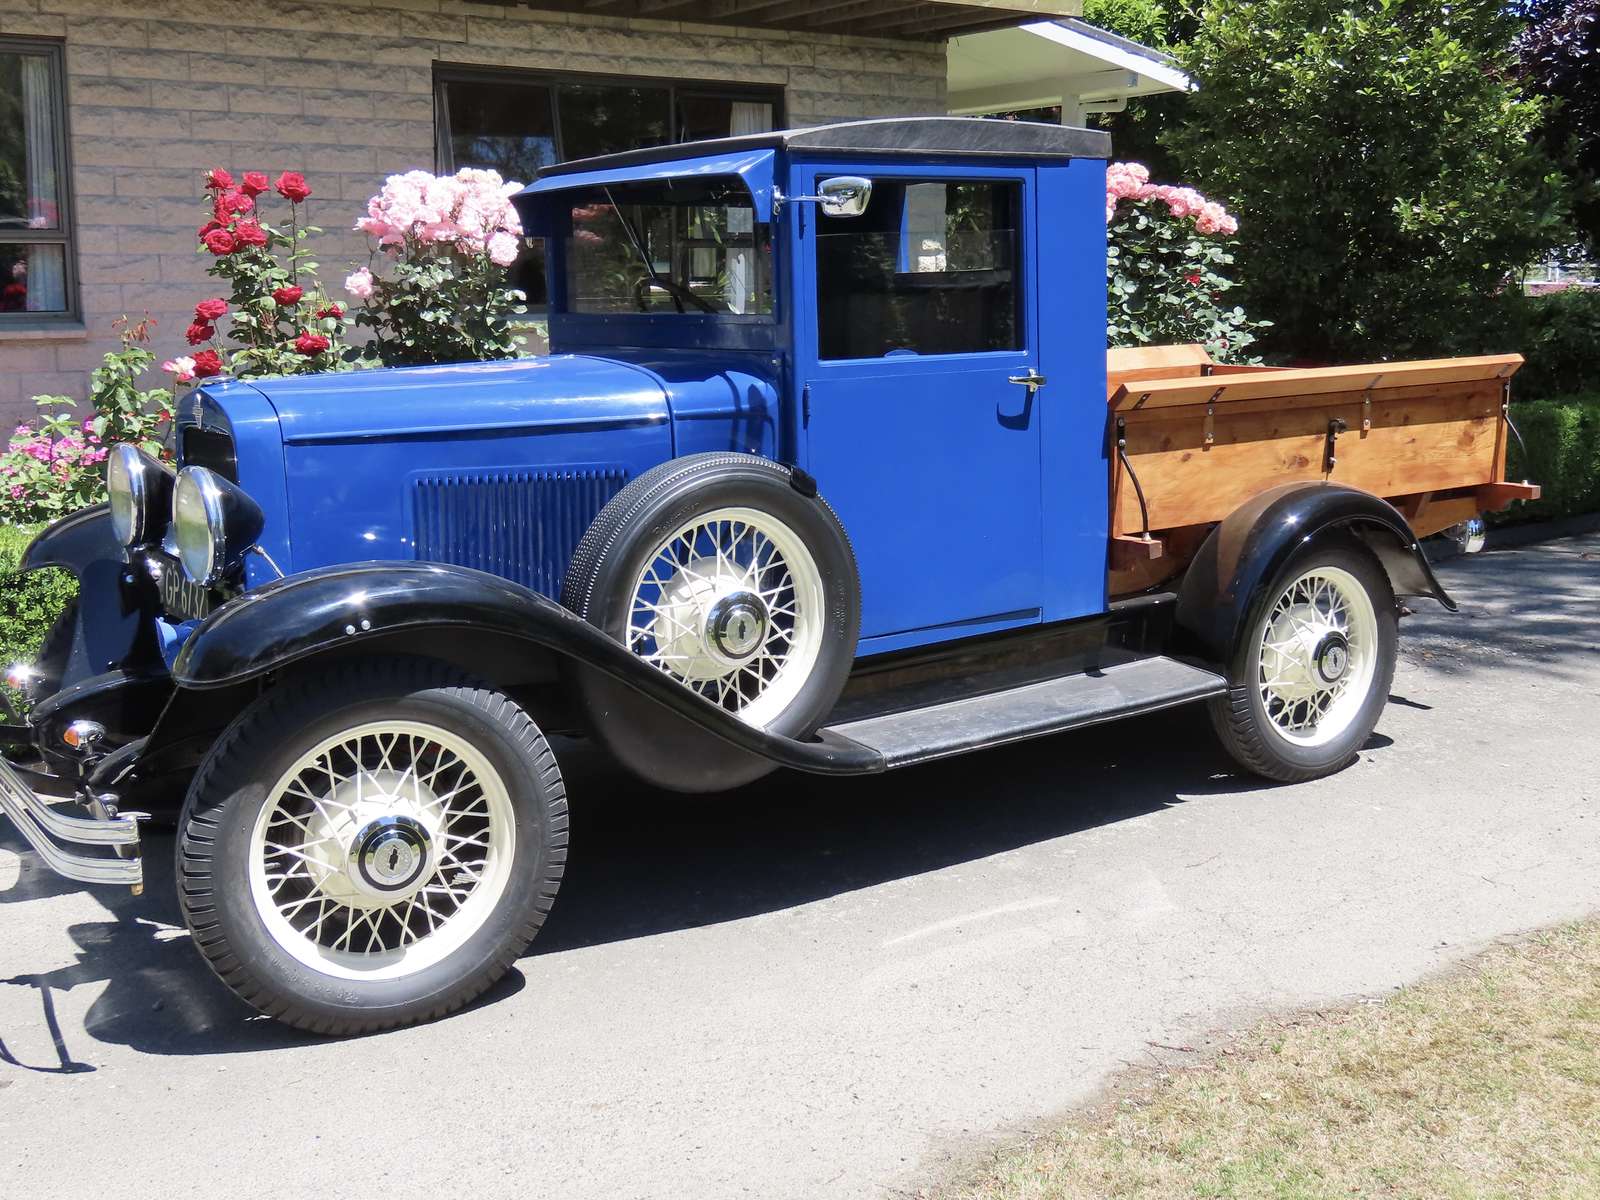 1931 Chevrolet Truck puzzle online from photo